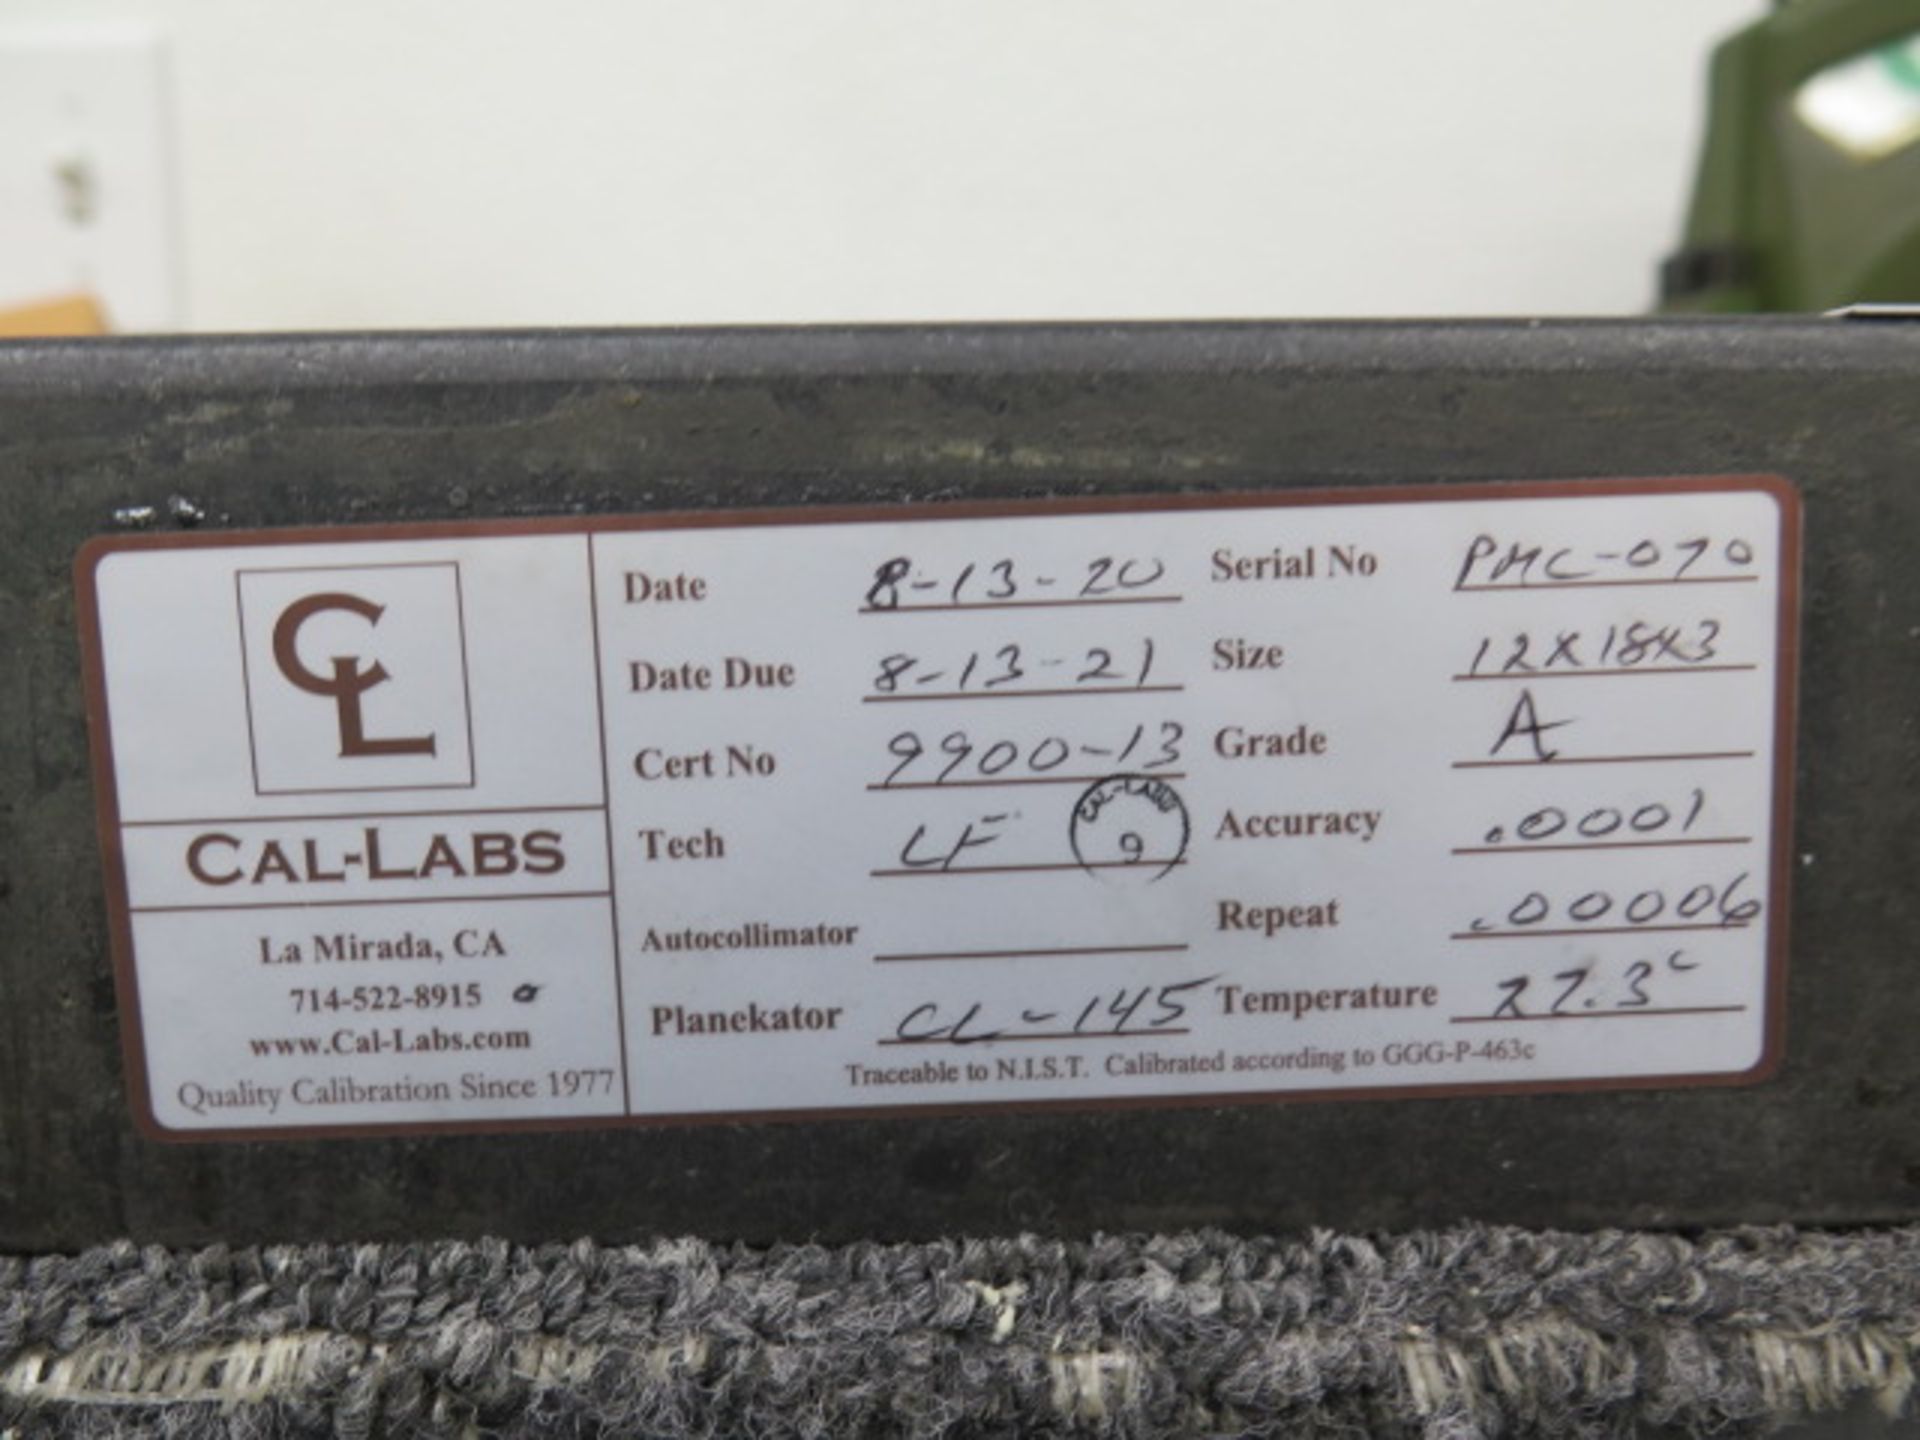 12" x 18" x 3" Granite Surface Plate (SOLD AS-IS - NO WARRANTY) - Image 3 of 3